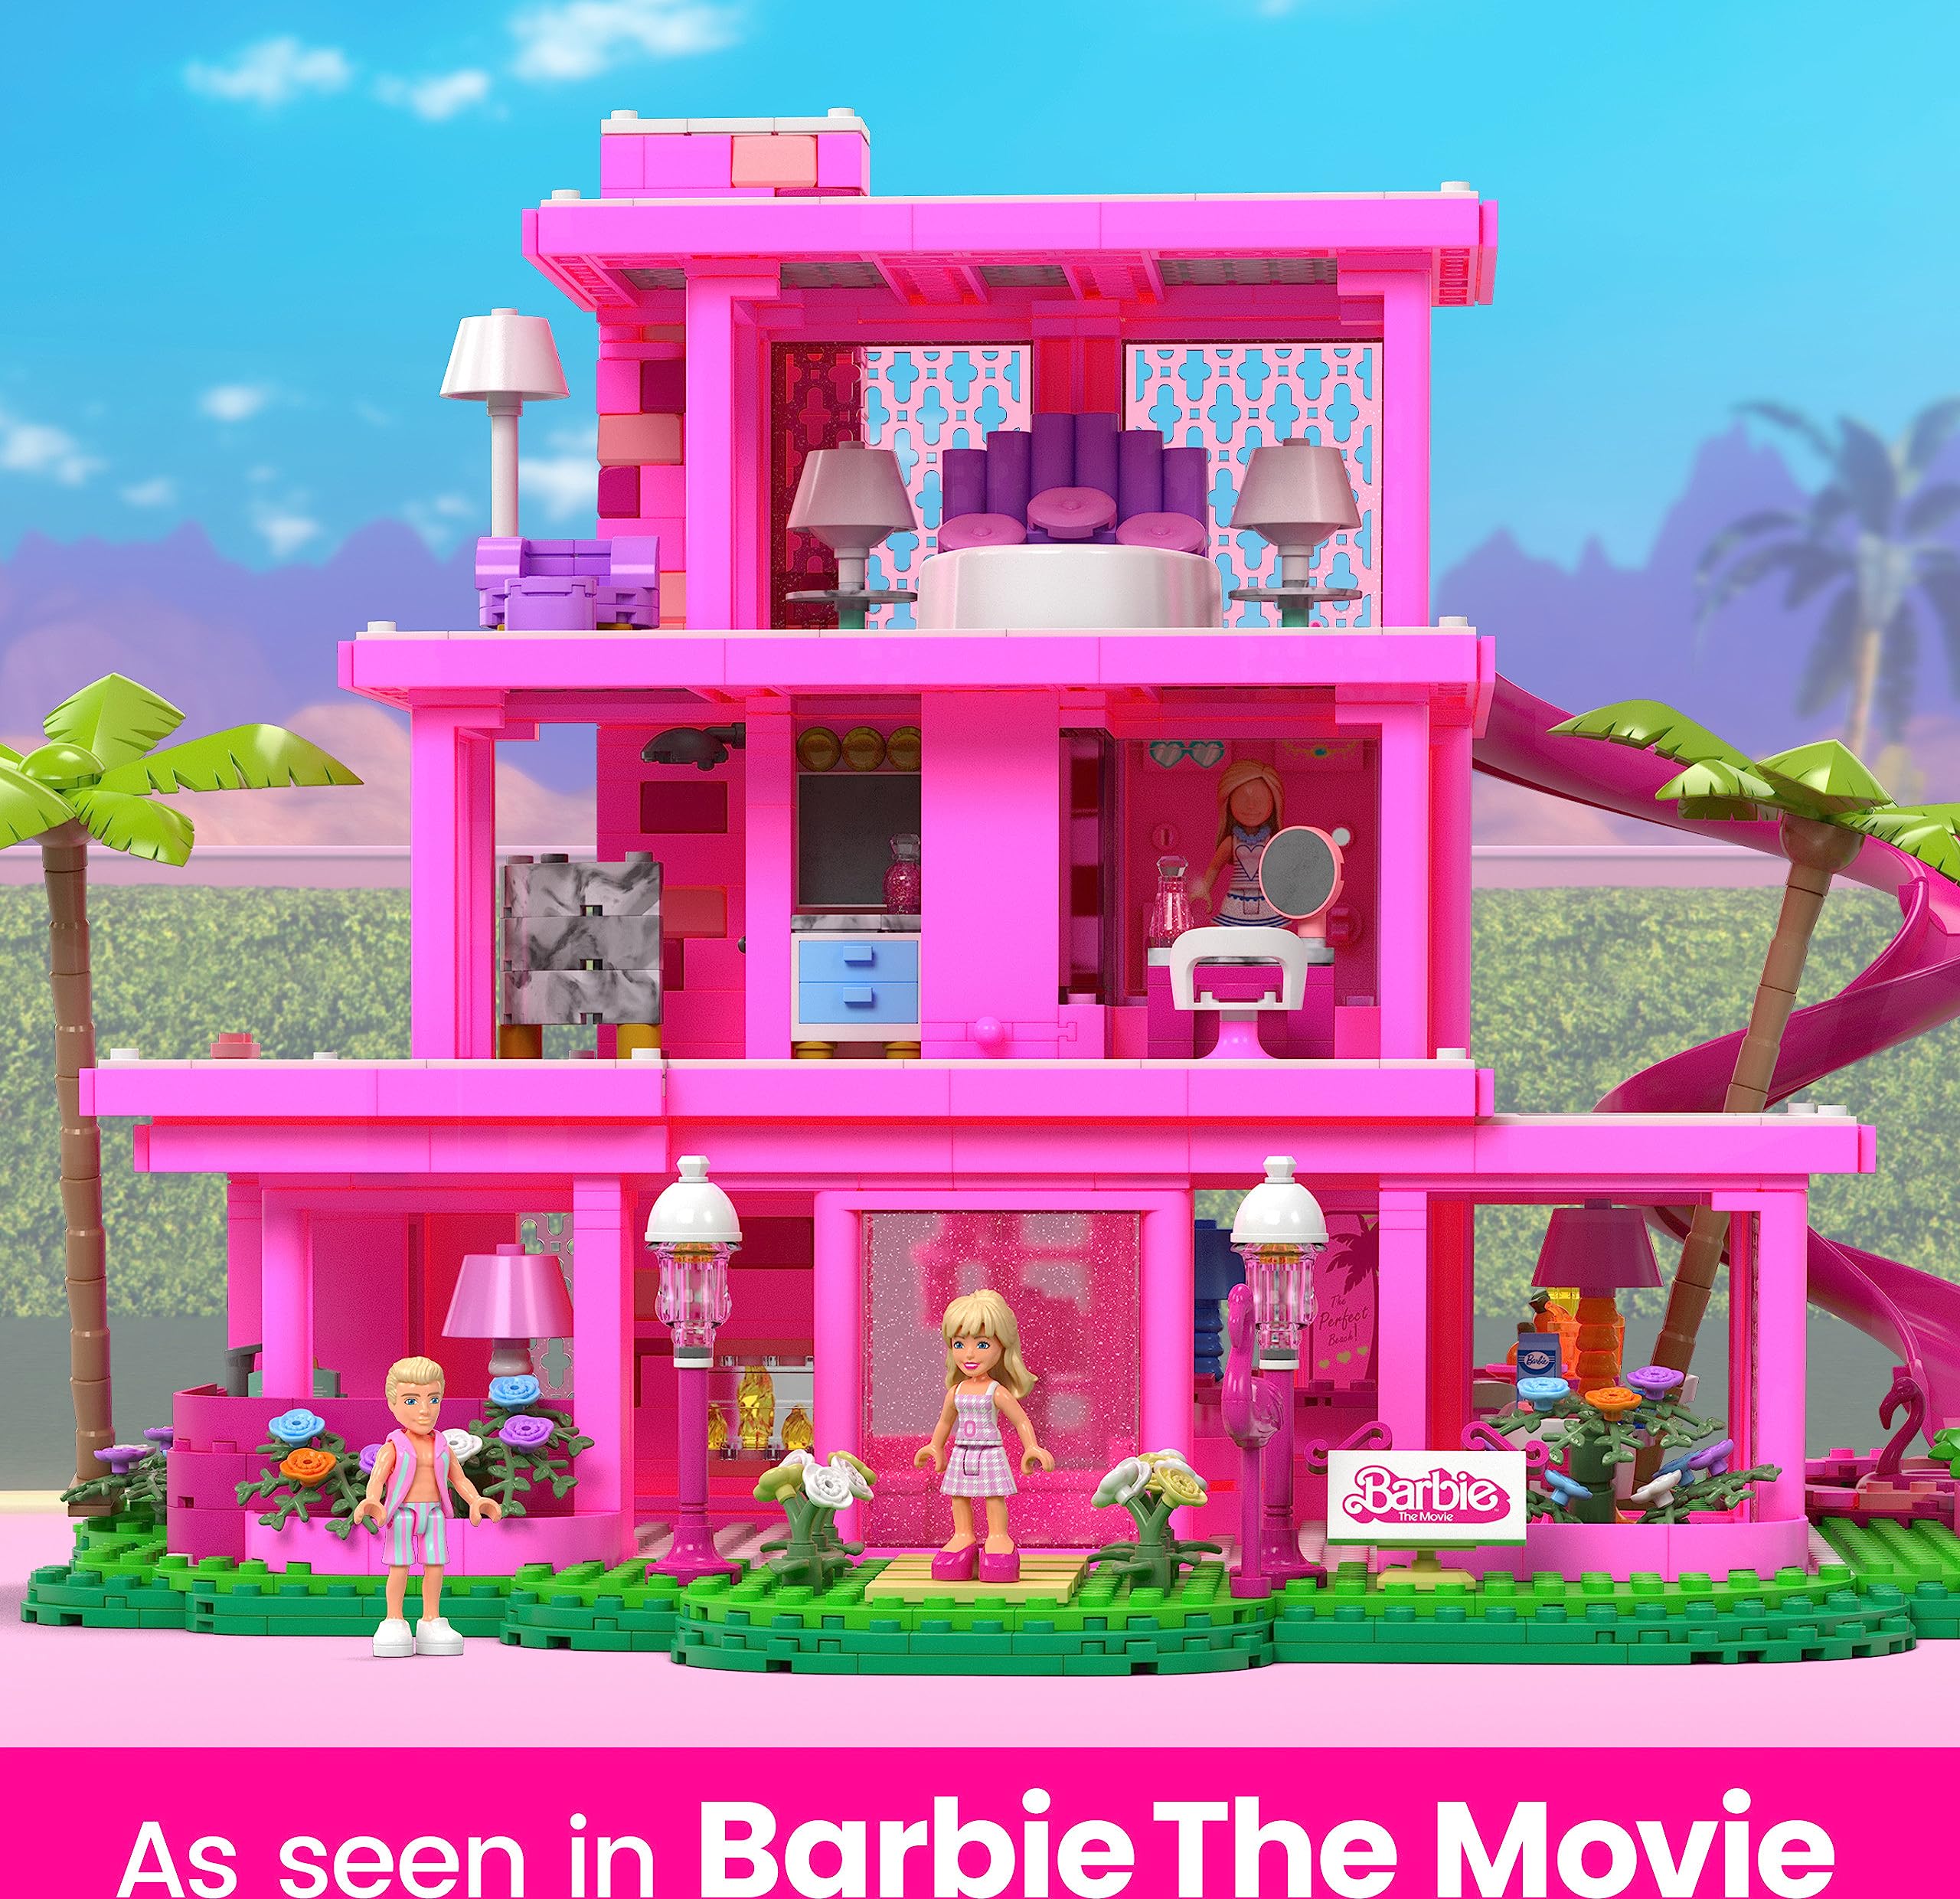 MEGA Barbie The Movie Building Toys for Adults, DreamHouse Replica with 1795 Pieces, Barbie and Ken Micro-Dolls and Accessories, for Collectors